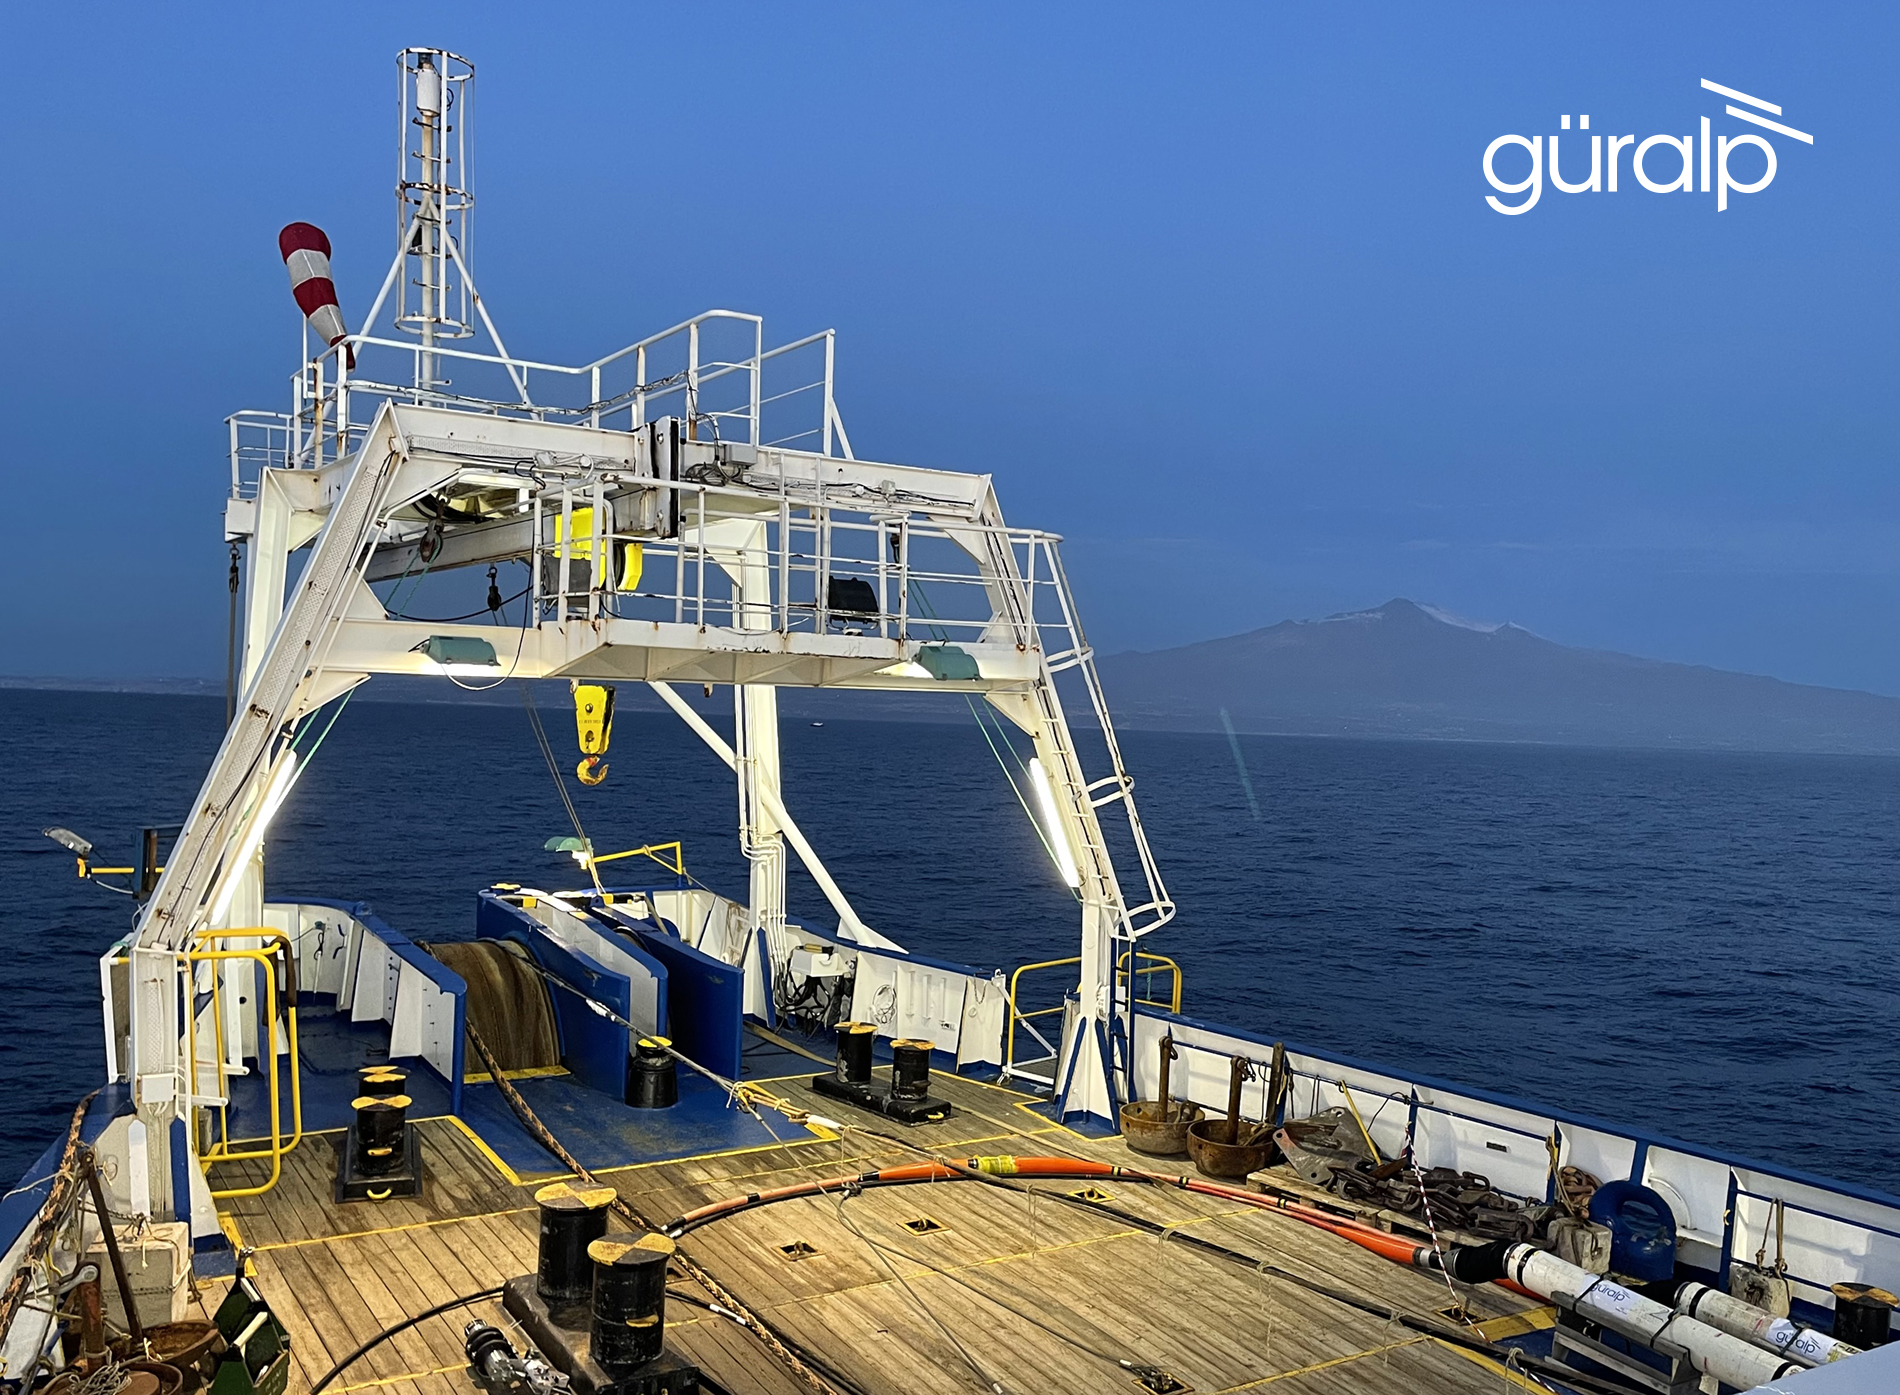 The SMART cable awaiting deployment on the deck of the Antionio Meucci cable laying vessel